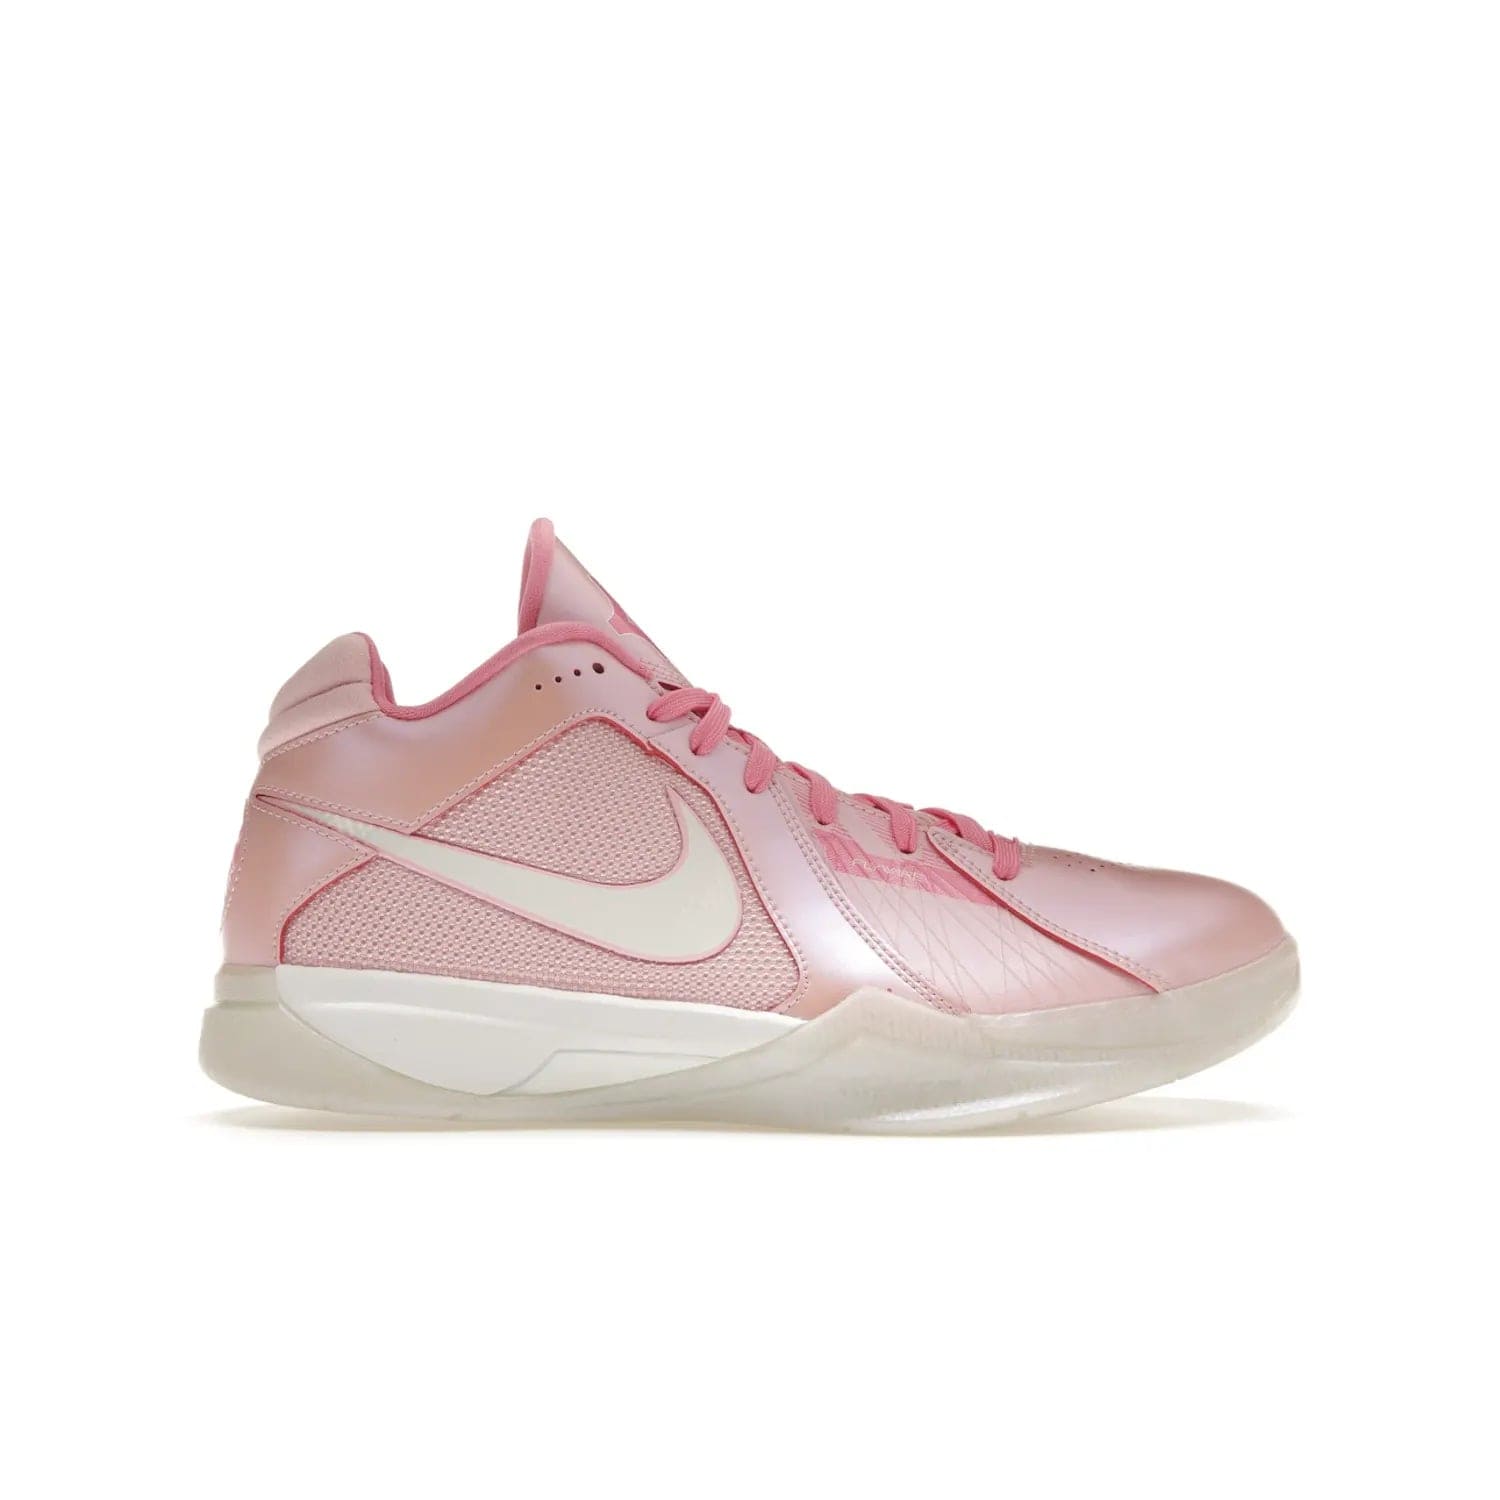 Nike KD 3 Aunt Pearl - Image 1 - Only at www.BallersClubKickz.com - Introducing the Nike KD 3 Aunt Pearl. Featuring a bold Medium Soft Pink, White, & Lotus Pink colorway. Get ready to stand out this October 15th.